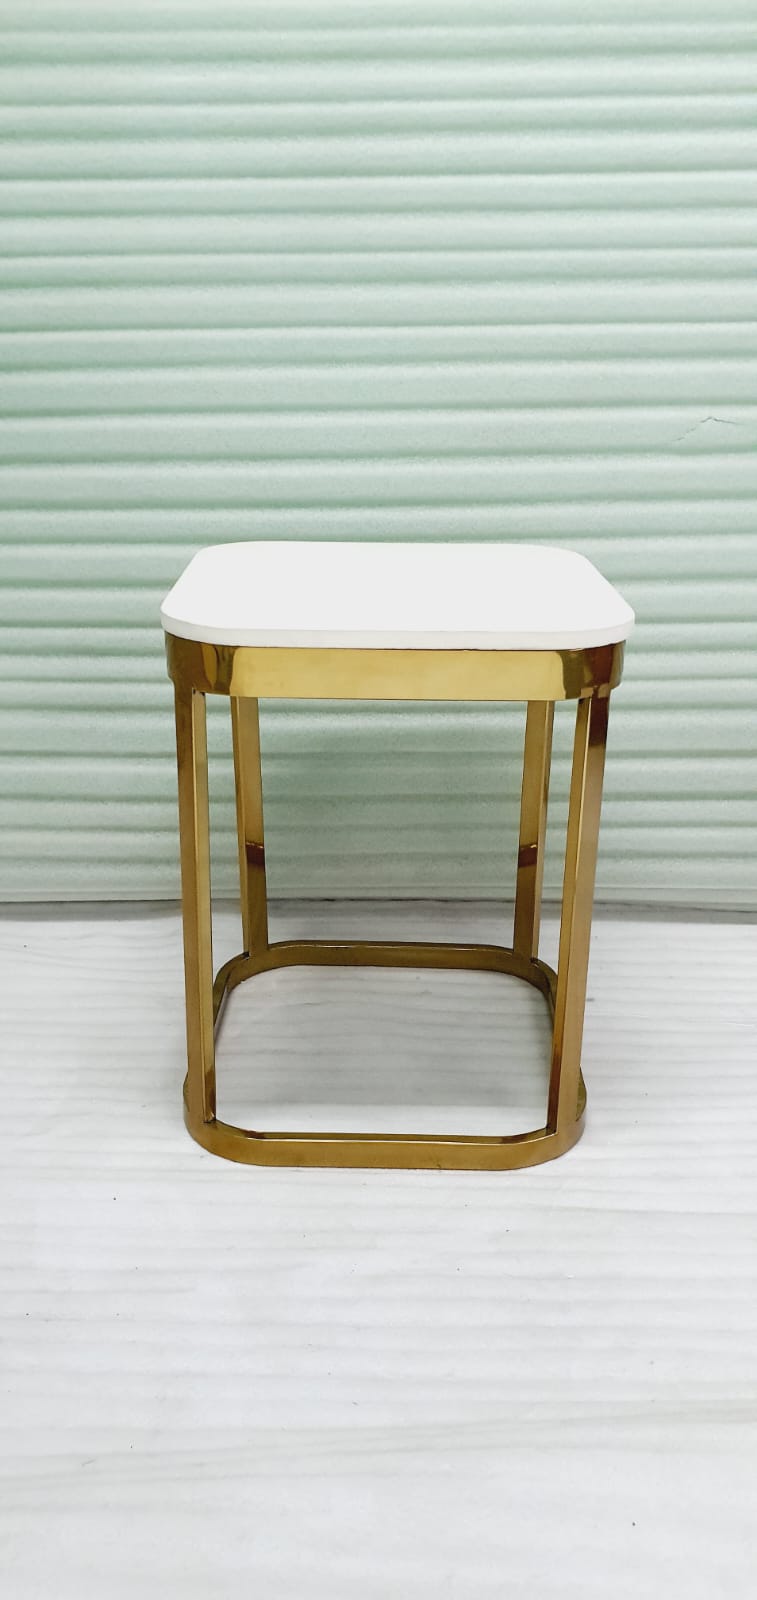 PC Home Decor | Steel Corner Table with Marble Table Top, White and Gold